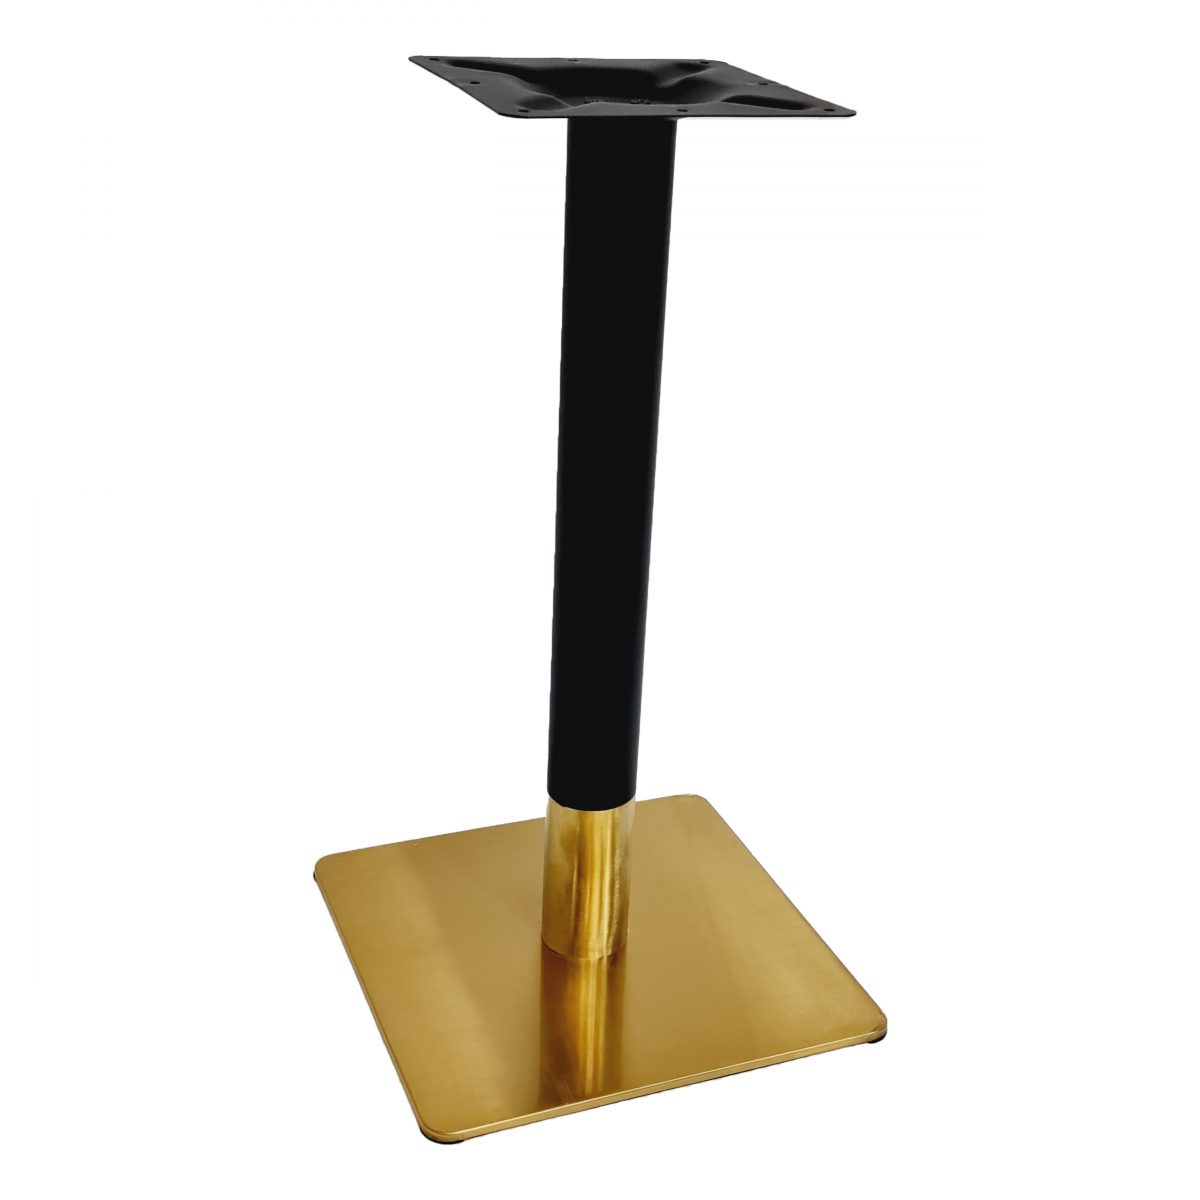 luxurious and stylish leg for your dining table! This exquisite base is manufactured from superior black steel and finished with a chic brass baseplate and column accent.